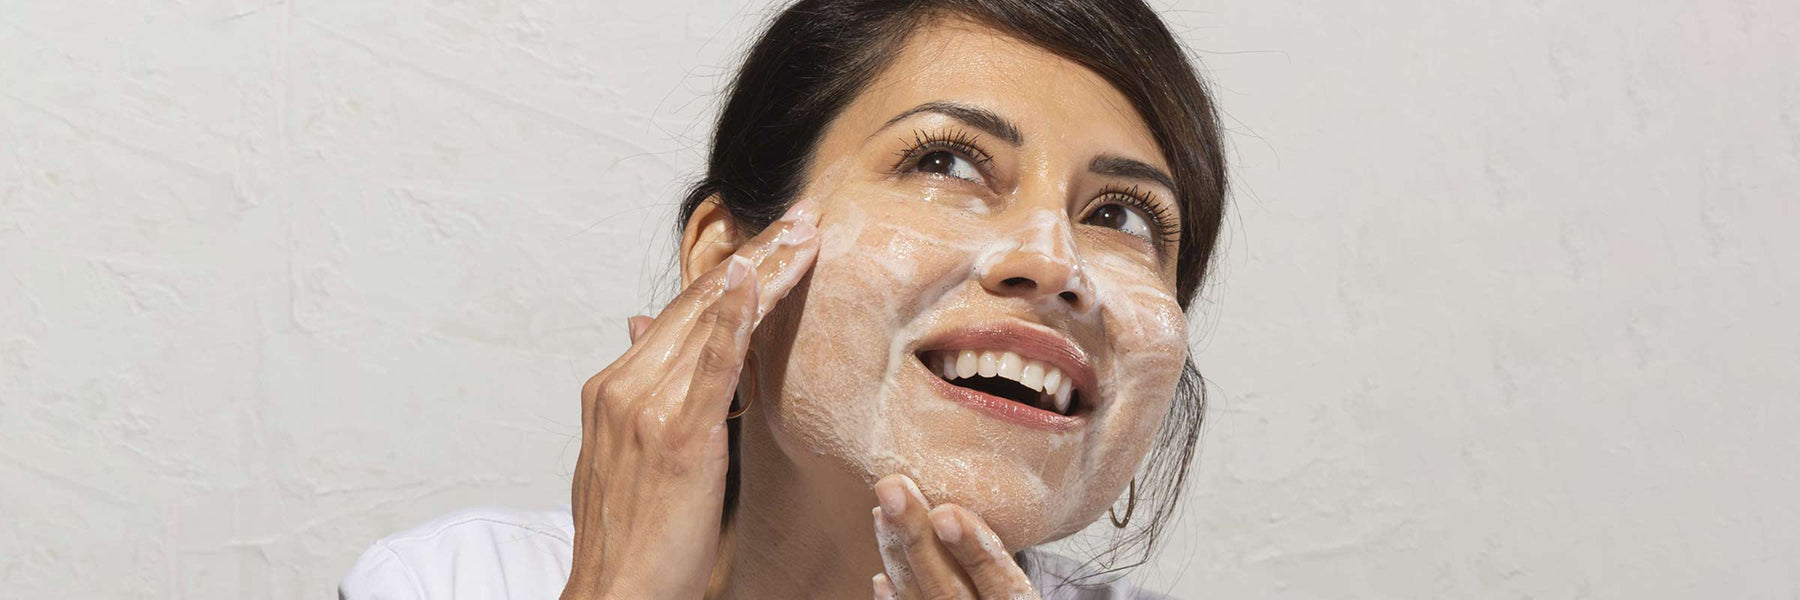 How to Wash Your Face Properly for Perfect Skin